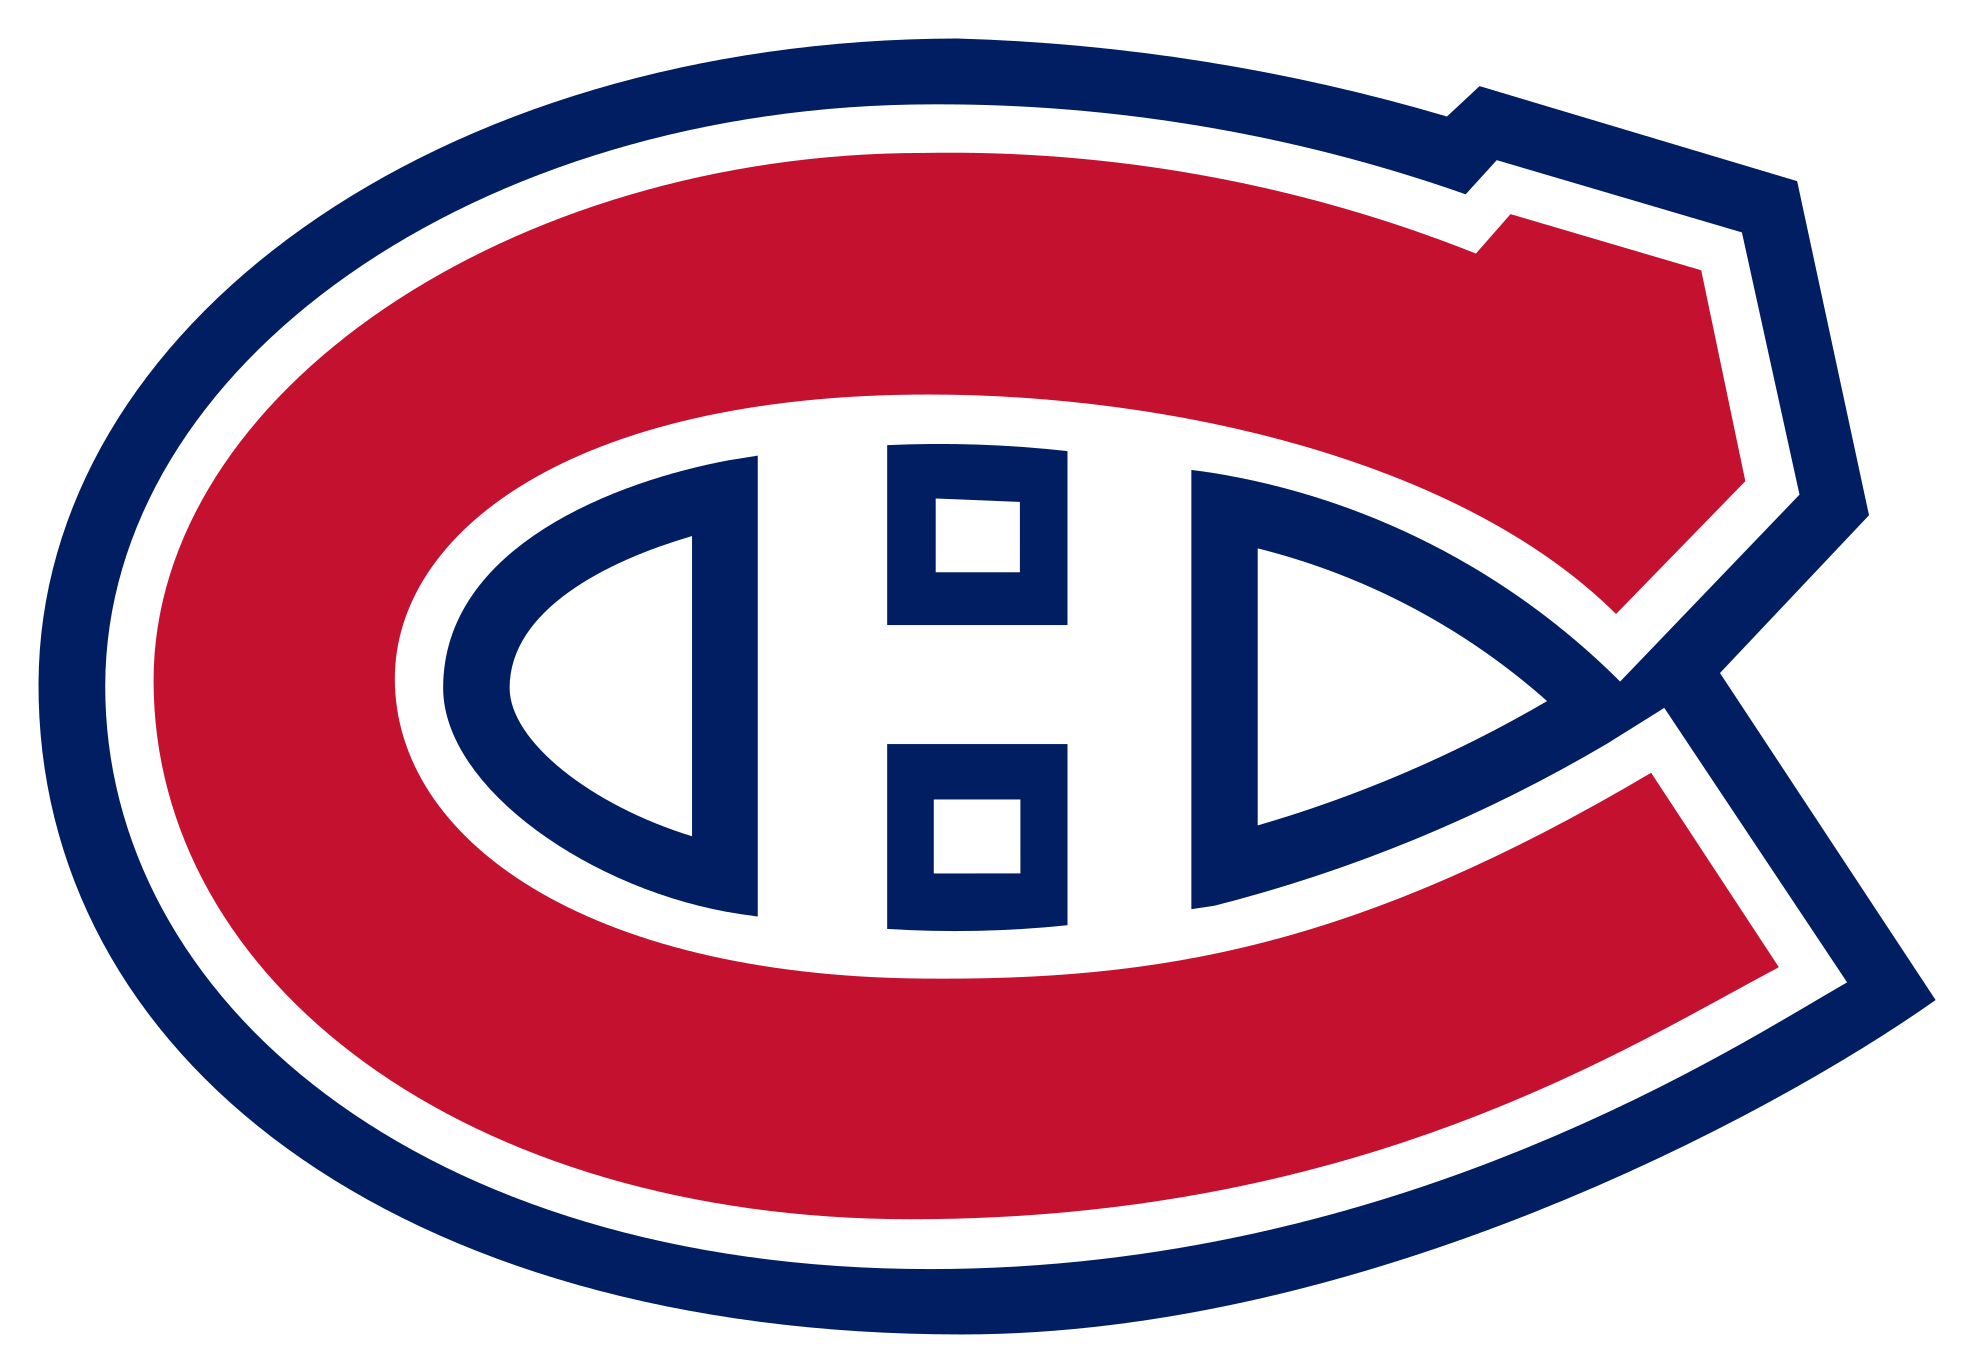 Nhl Series - Montreal Canadiens Wall Decal (2000x1371)